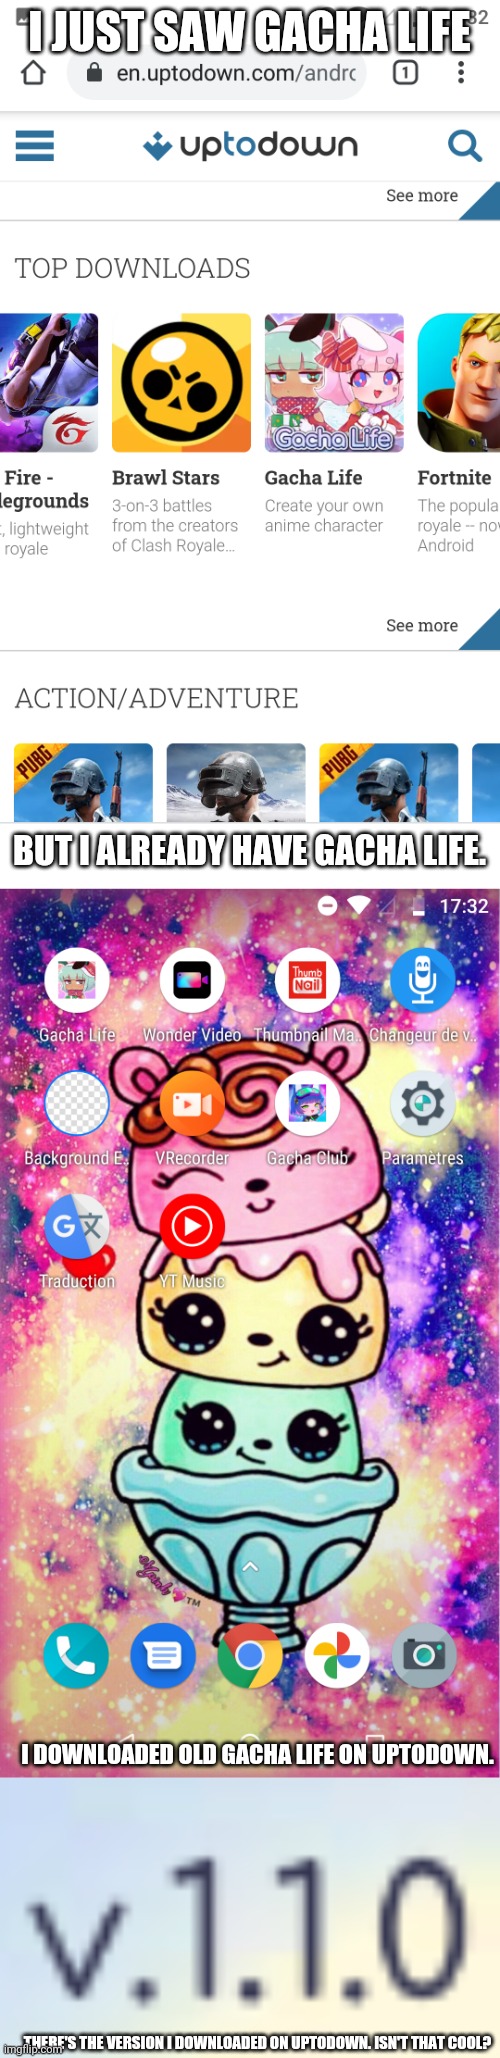 I downloaded Gacha life 1.1.0 on uptodown on December 1st 2020! | I JUST SAW GACHA LIFE; BUT I ALREADY HAVE GACHA LIFE. I DOWNLOADED OLD GACHA LIFE ON UPTODOWN. THERE'S THE VERSION I DOWNLOADED ON UPTODOWN. ISN'T THAT COOL? | image tagged in gacha life,uptodown,apk,110 | made w/ Imgflip meme maker